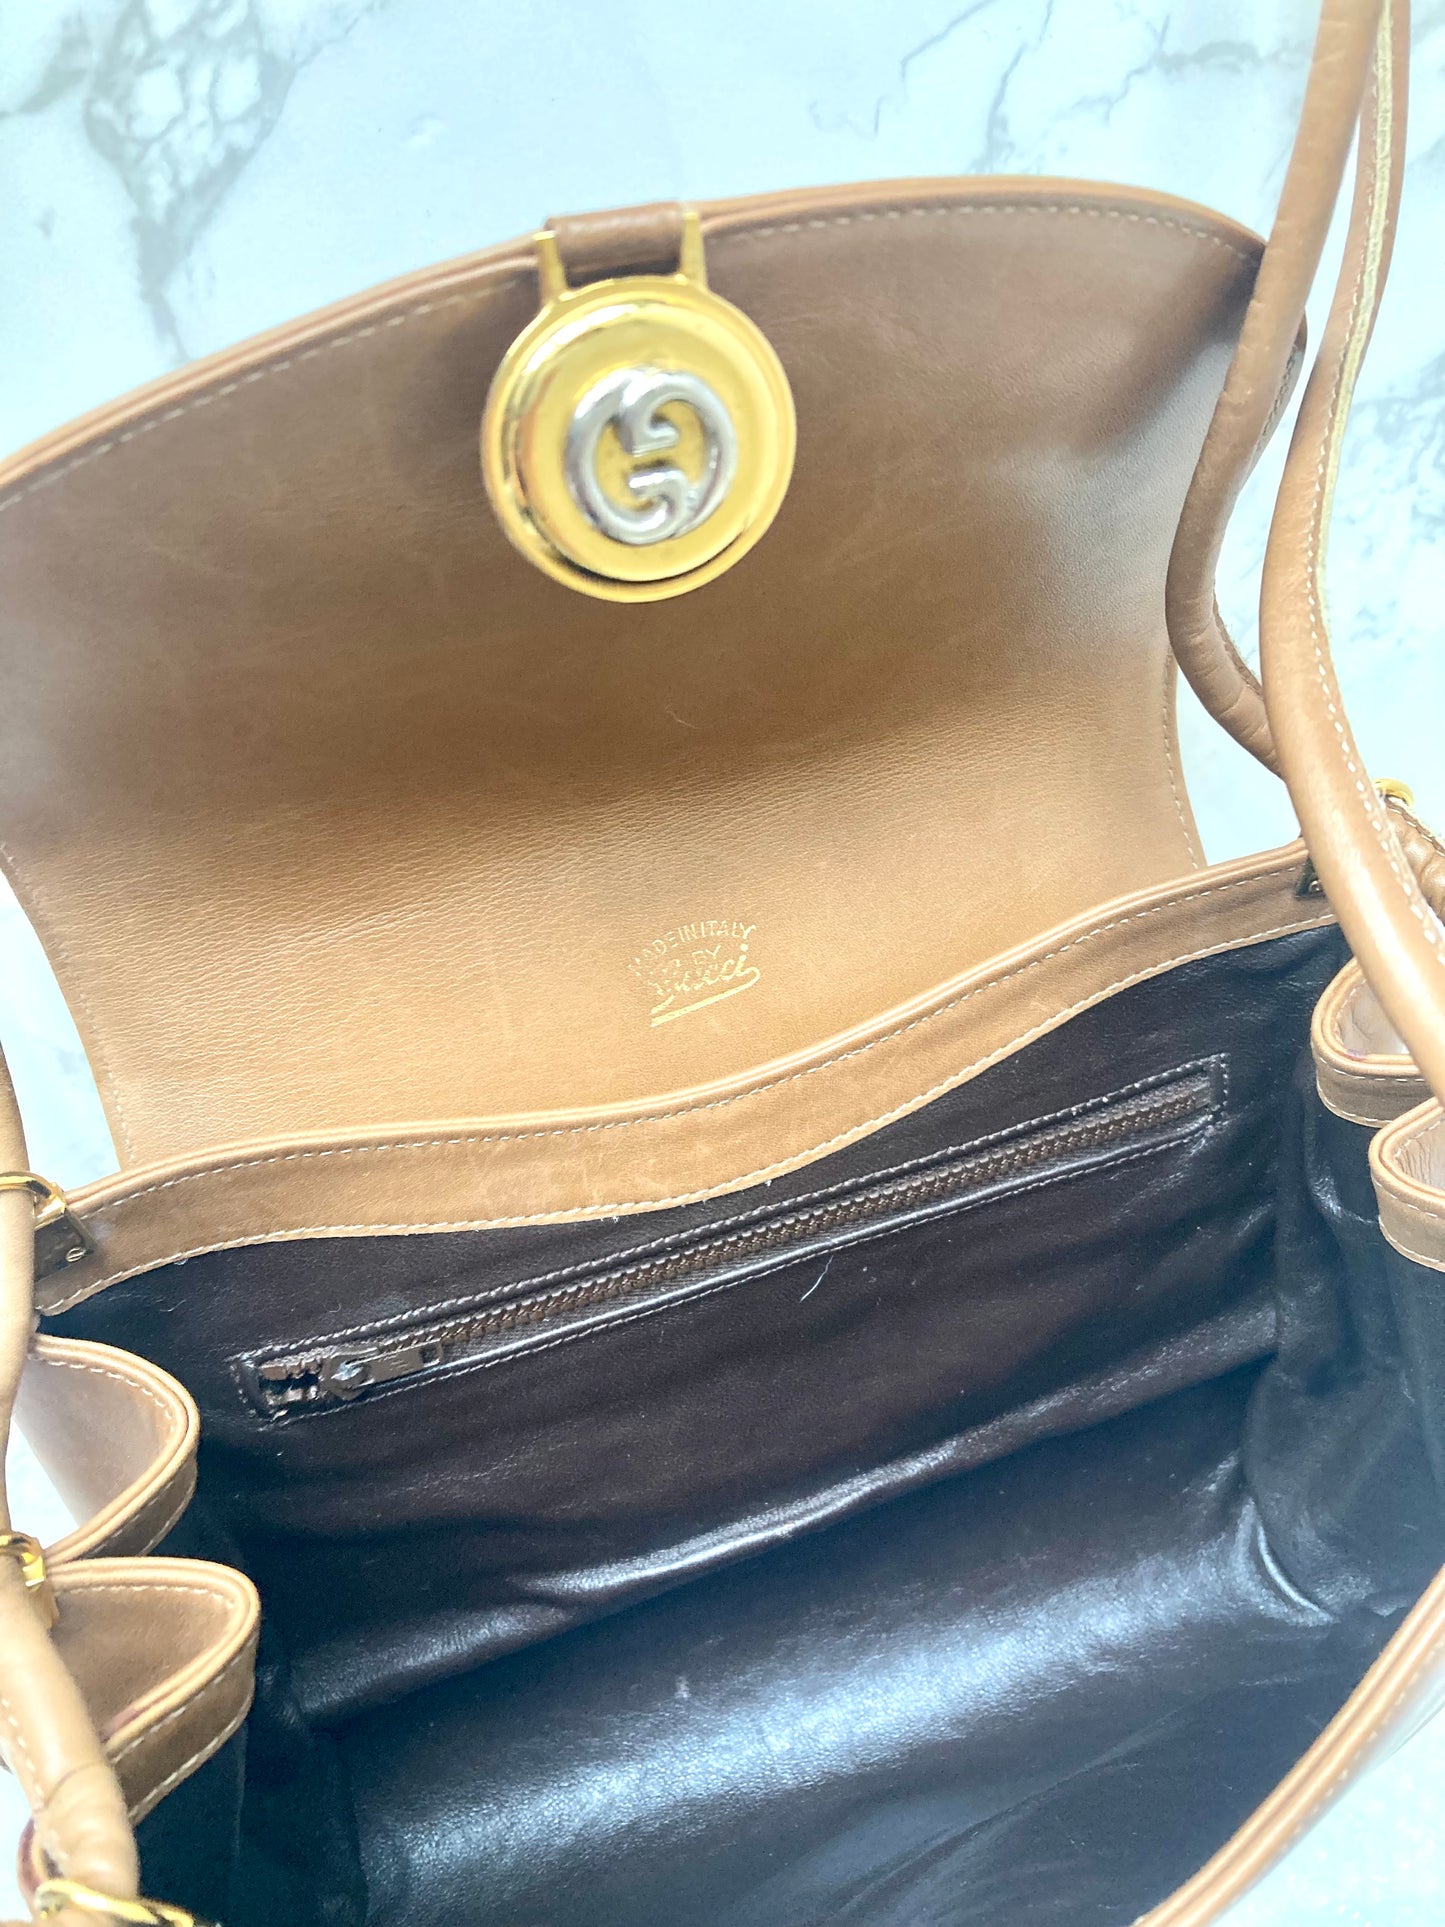 GUCCI Rare Caramel Brown x Gold Coin Leather Shoulder Bag